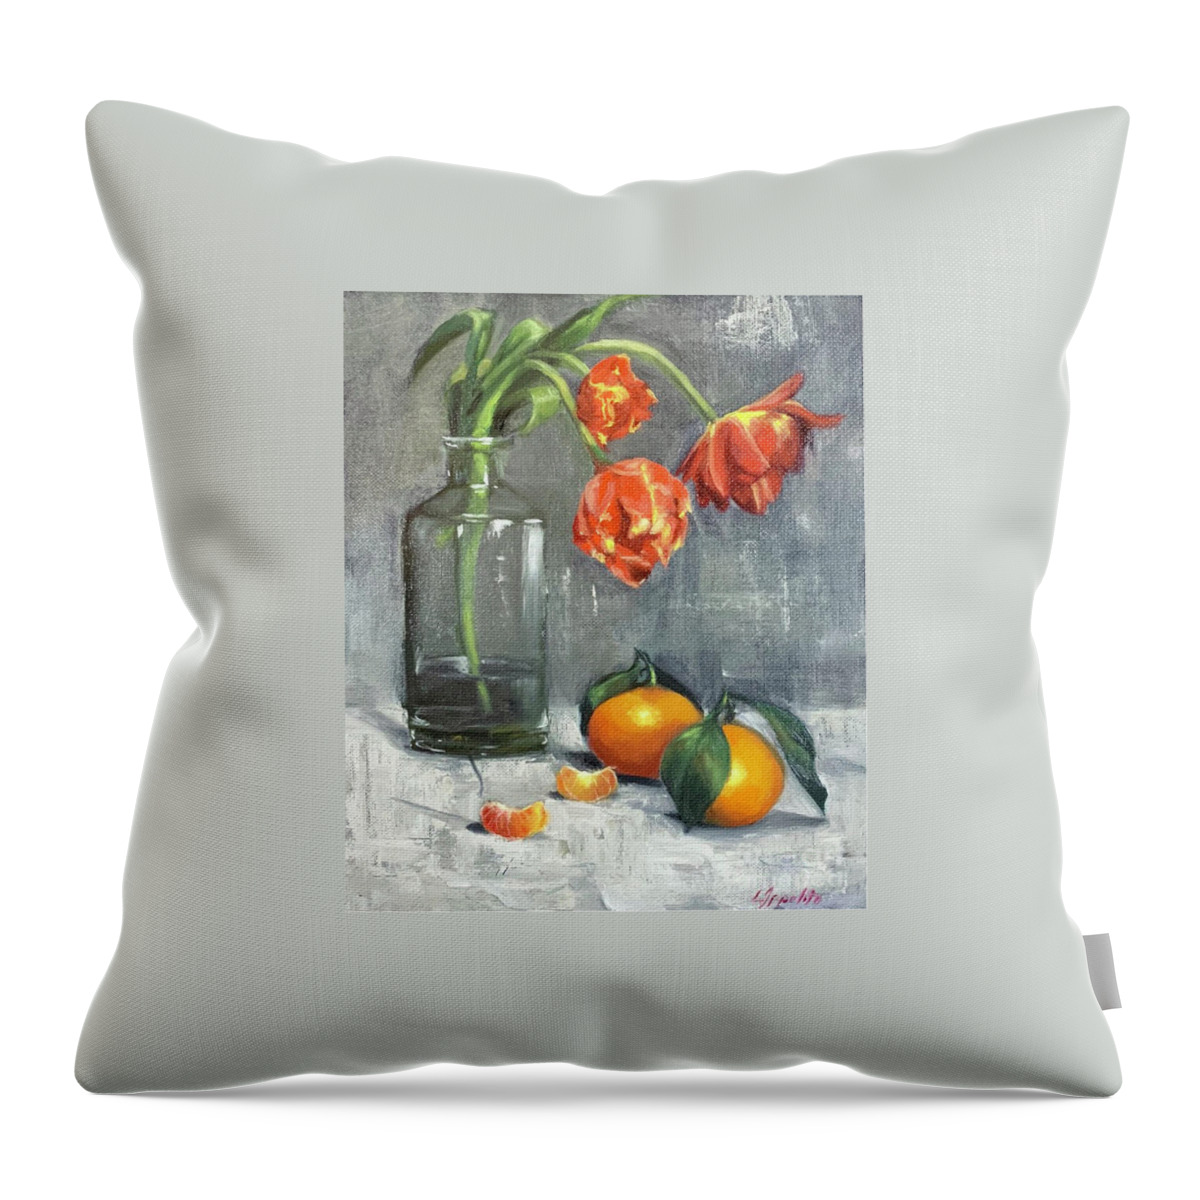 Stilllife Throw Pillow featuring the painting Tulips with Mandarins by Lori Ippolito